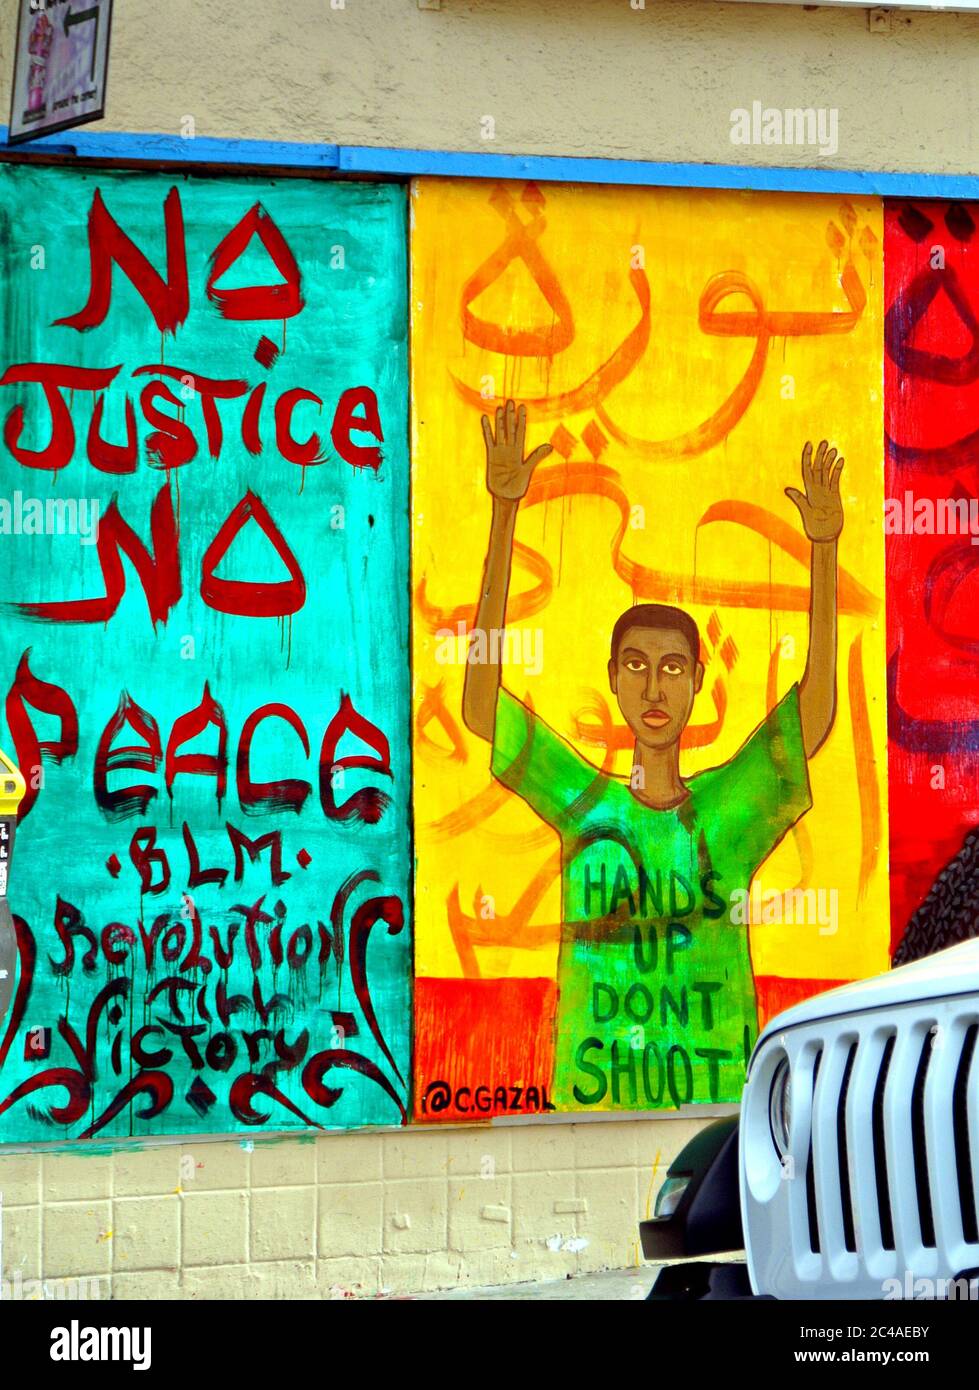 no justice no peace protest sign in the mission district of san francisco Stock Photo